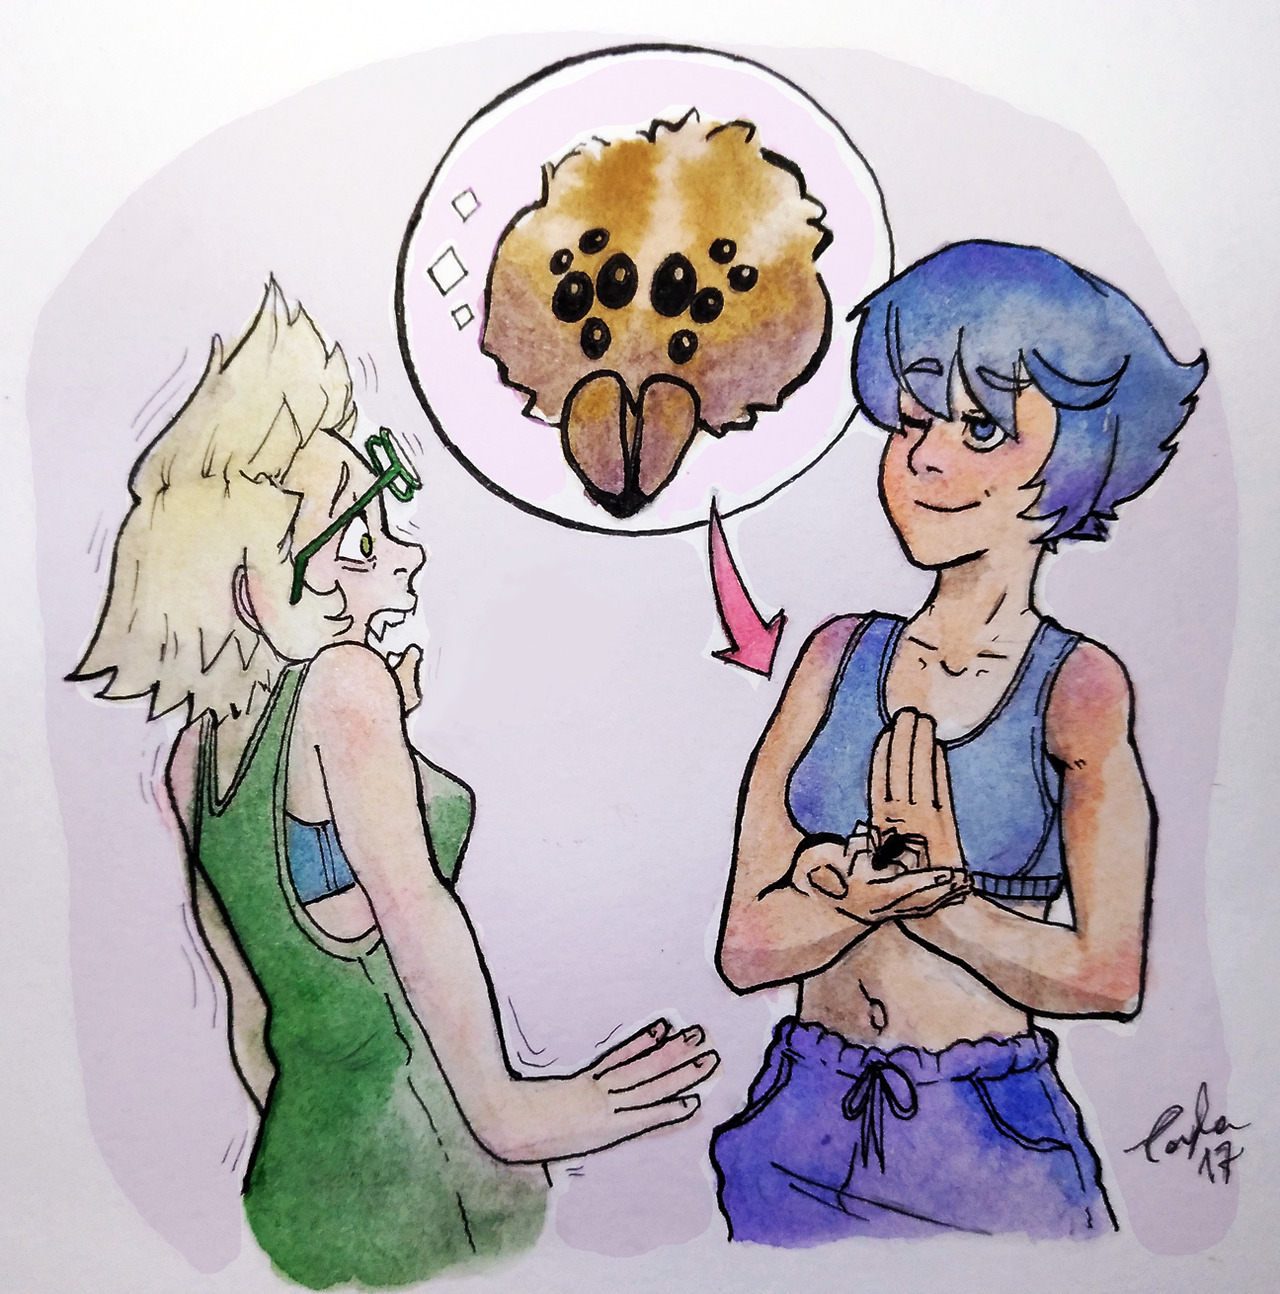 inktober 1/31. No tag for this one, just some cute human Lapidot. Based on the beautiful and cute Arachnophobia fanfic from @good-jorb-steven! (seriously go read it, it’s very funny)